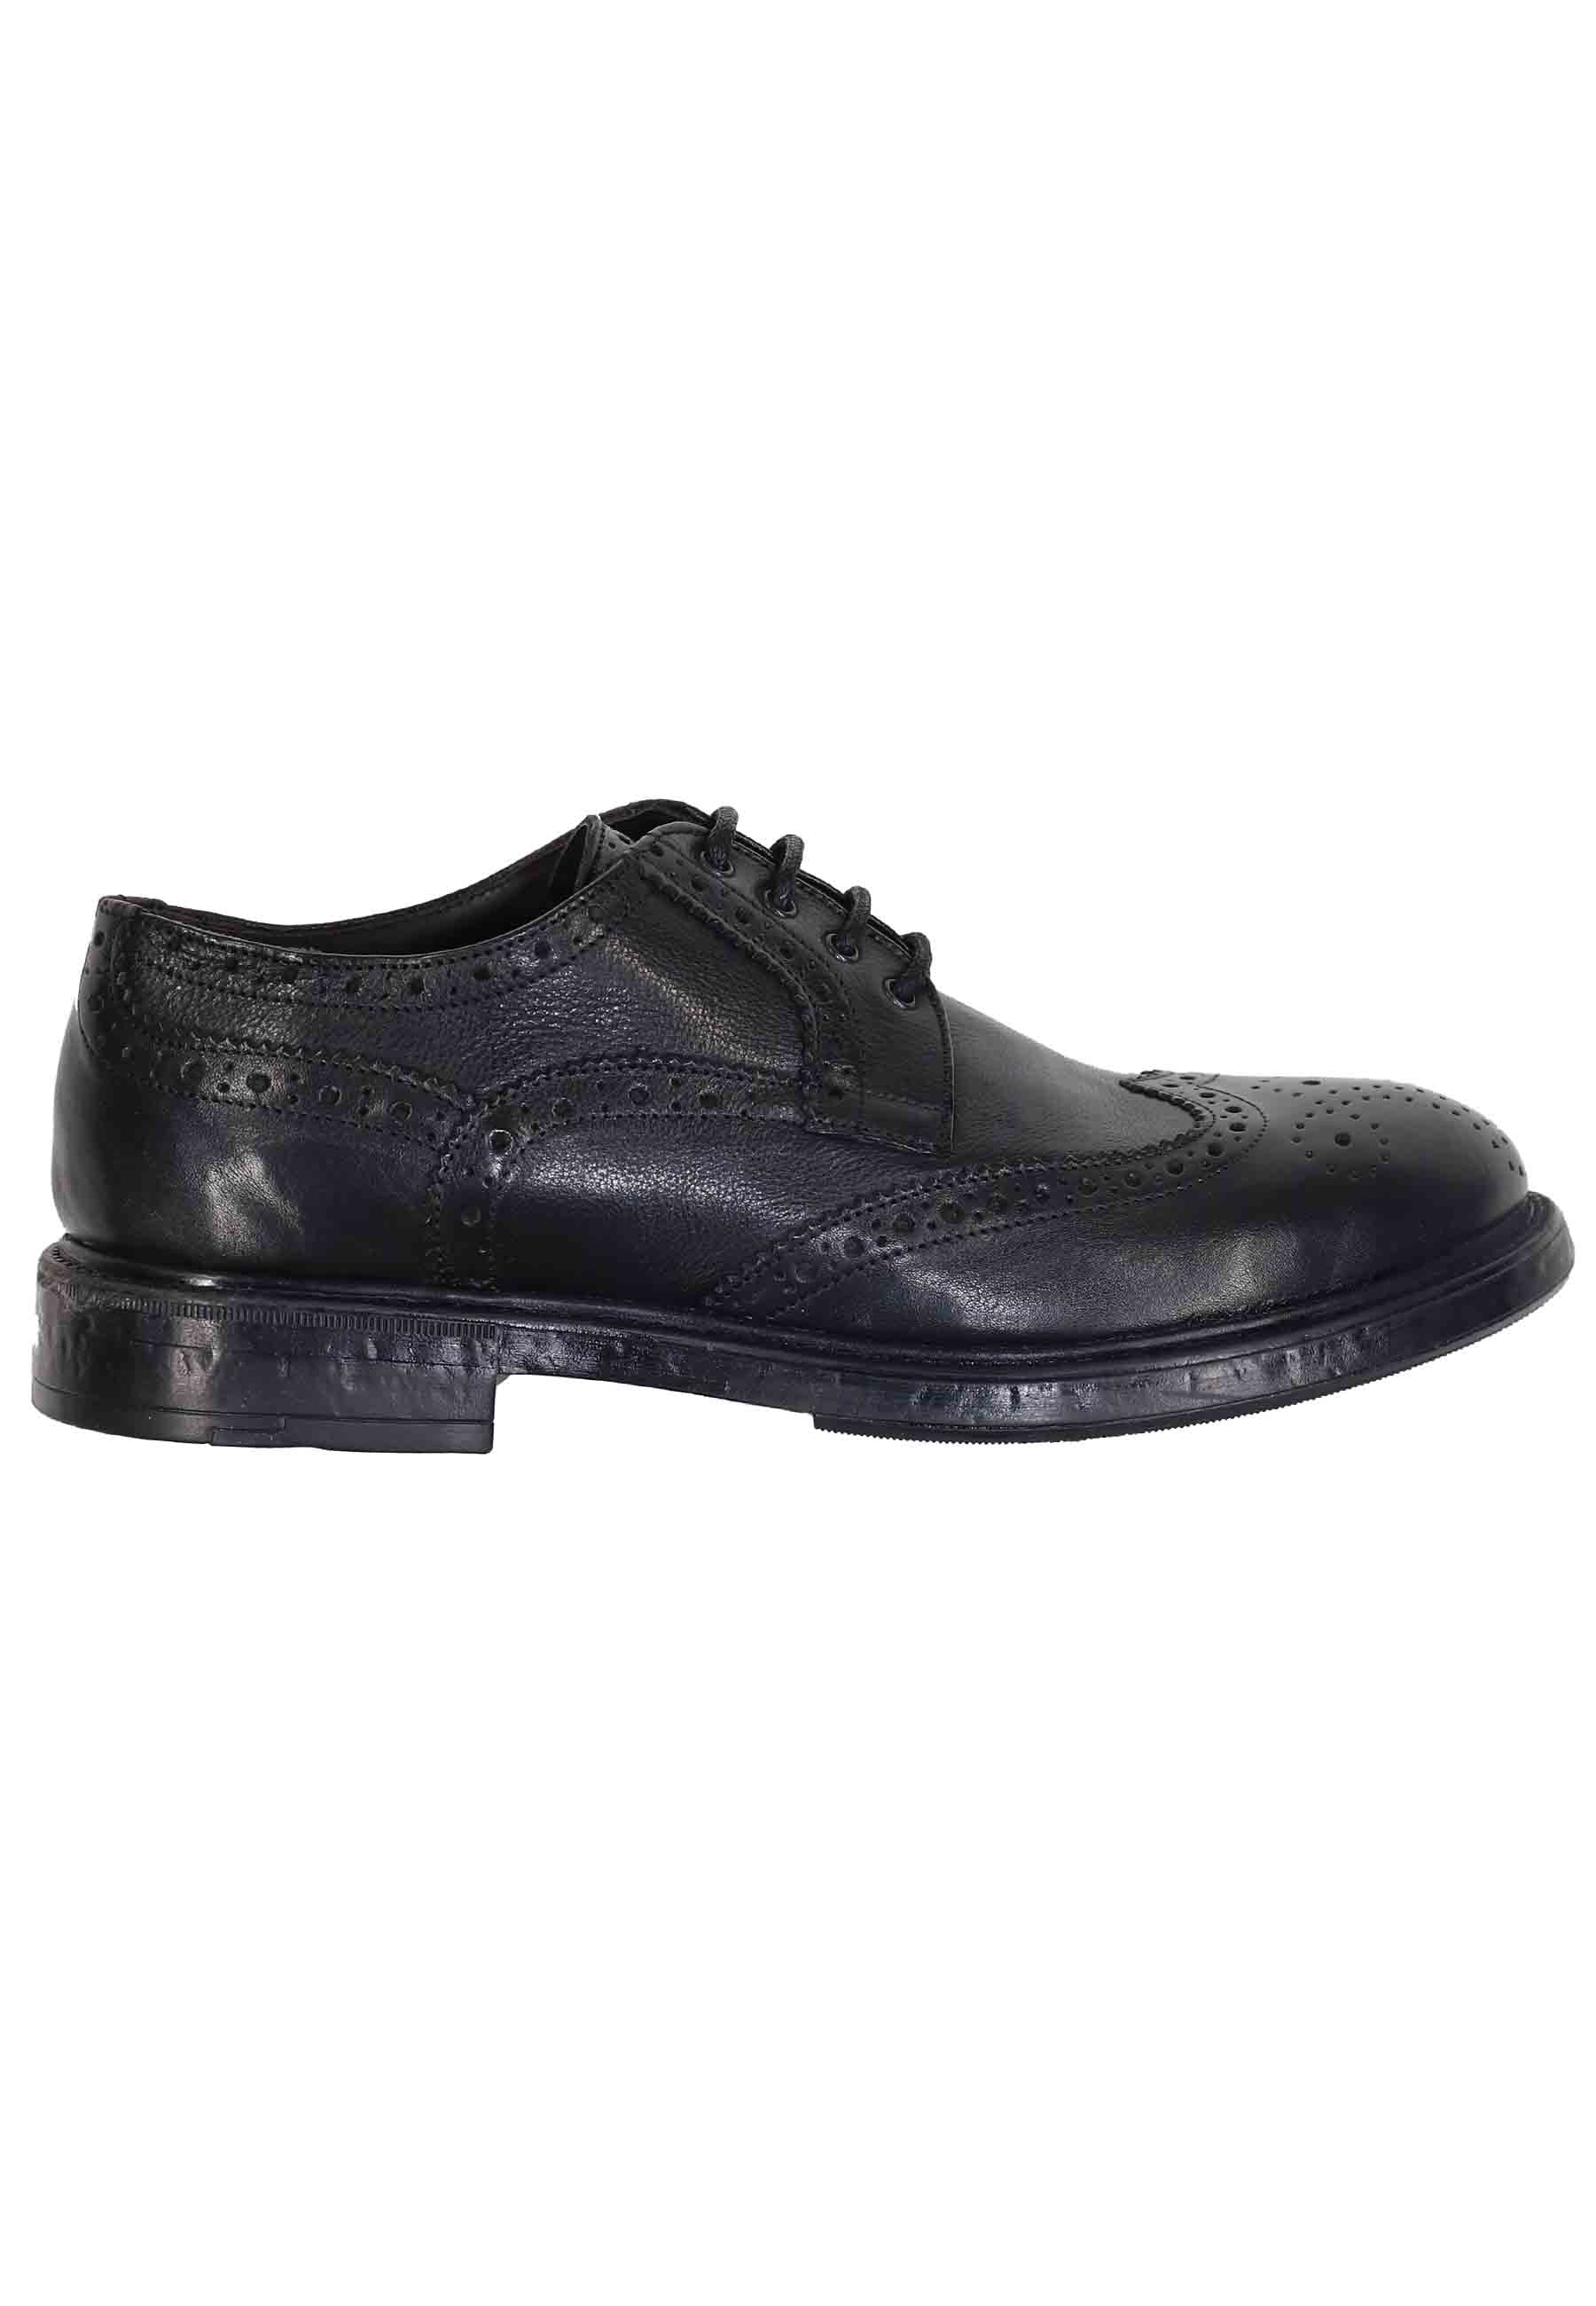 Men's lace-ups in black leather with English stitching and rubber sole